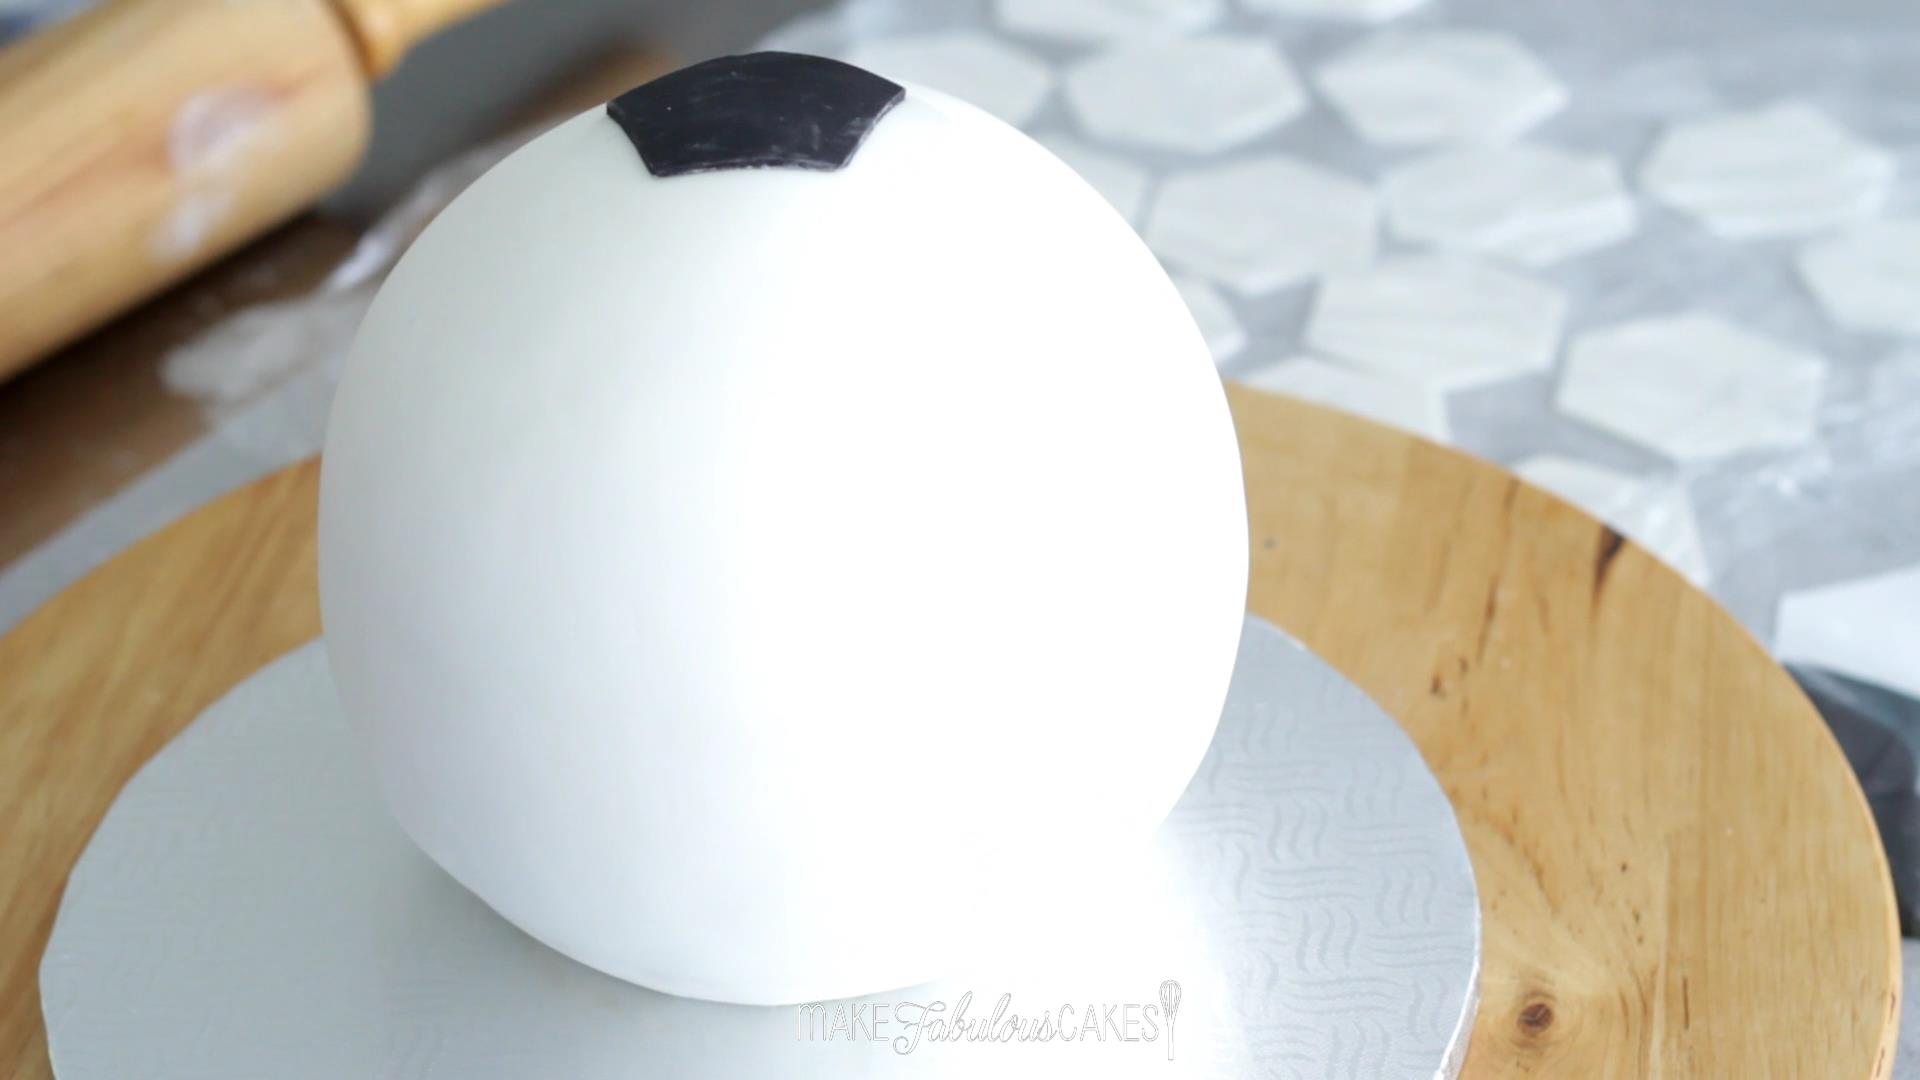 How to Make a Soccer Ball Cake | Confessions of a Cake Addict